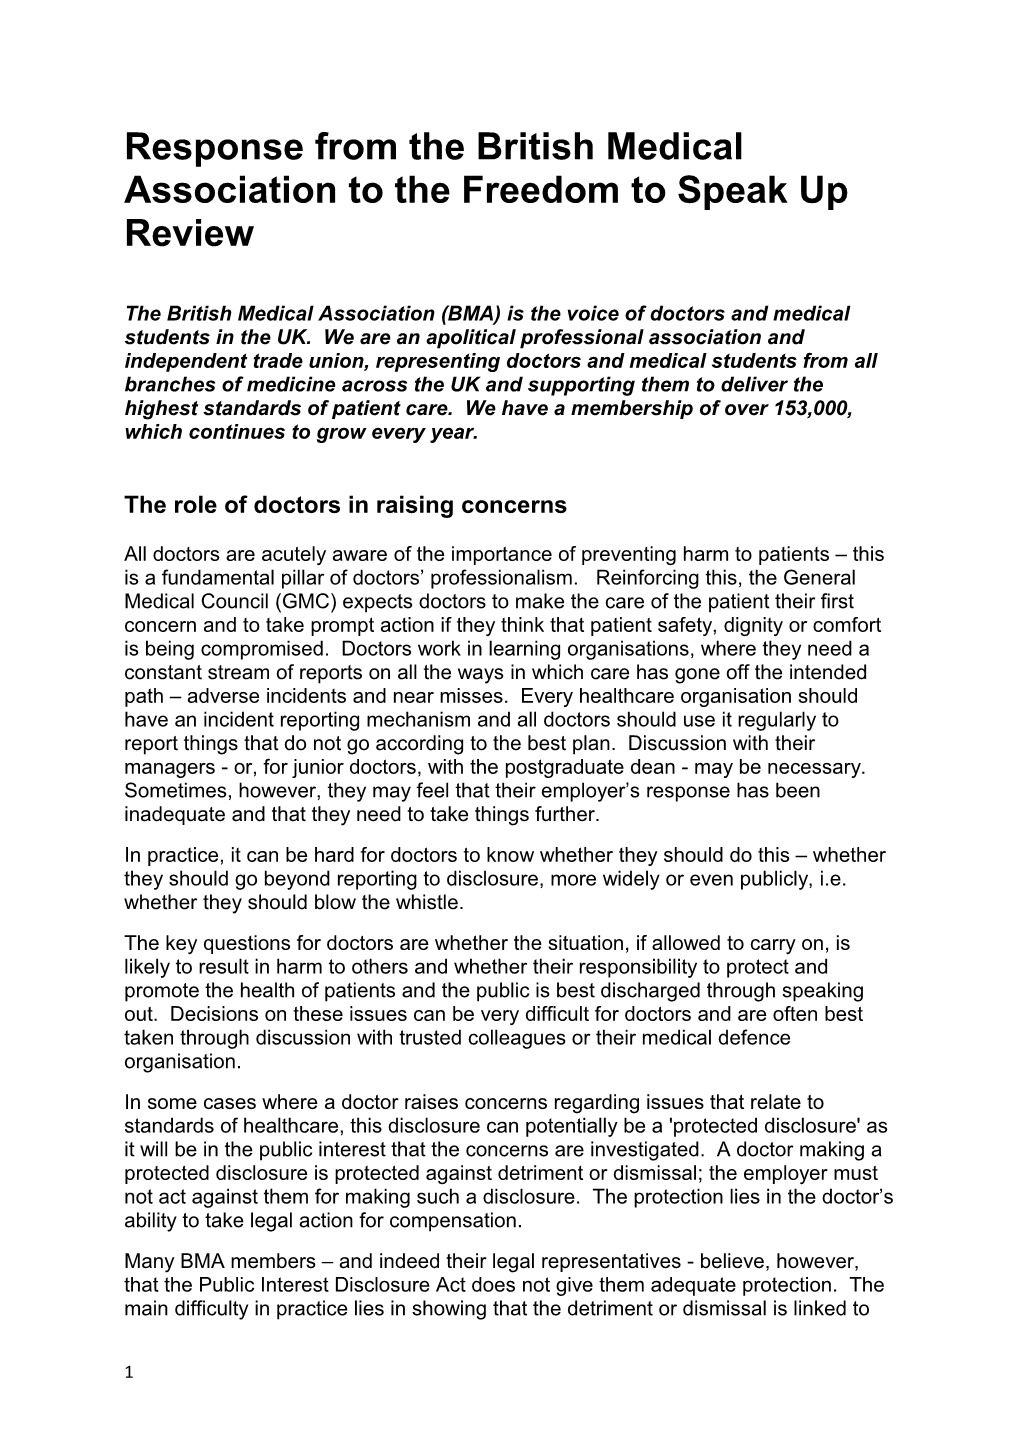 Response from the British Medical Association to the Freedom to Speak up Review